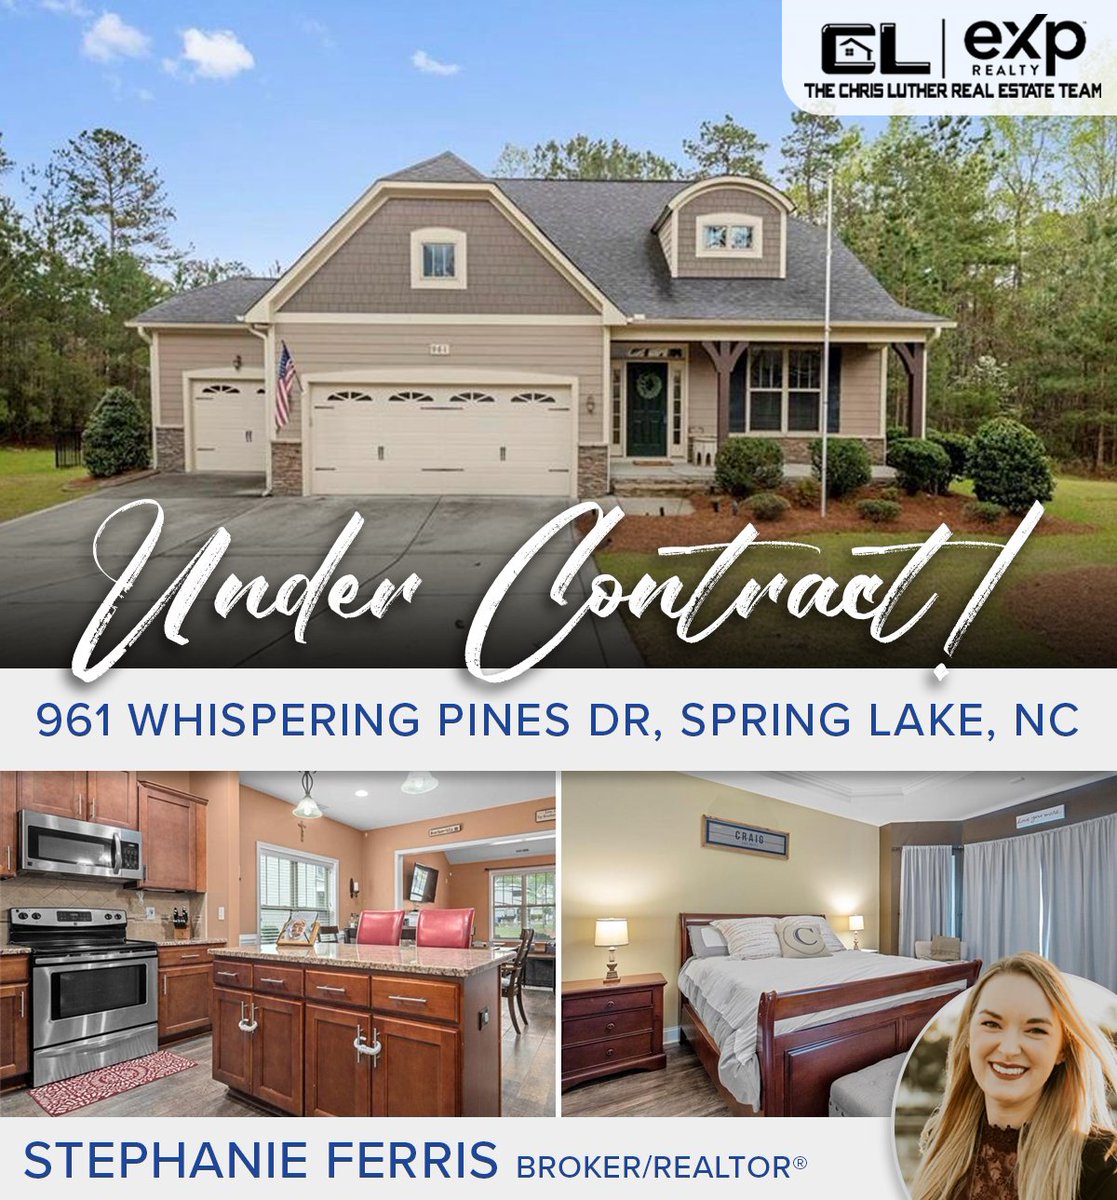 Congratulations to team agent Stephanie Ferris and her buyer clients for going UNDER CONTRACT on this beautiful Spring Lake home! 🏠

#springlakenc #fayettevillenc #fayettevillerealestate #fayettevillerealtor #chrislutherteam #exprealty